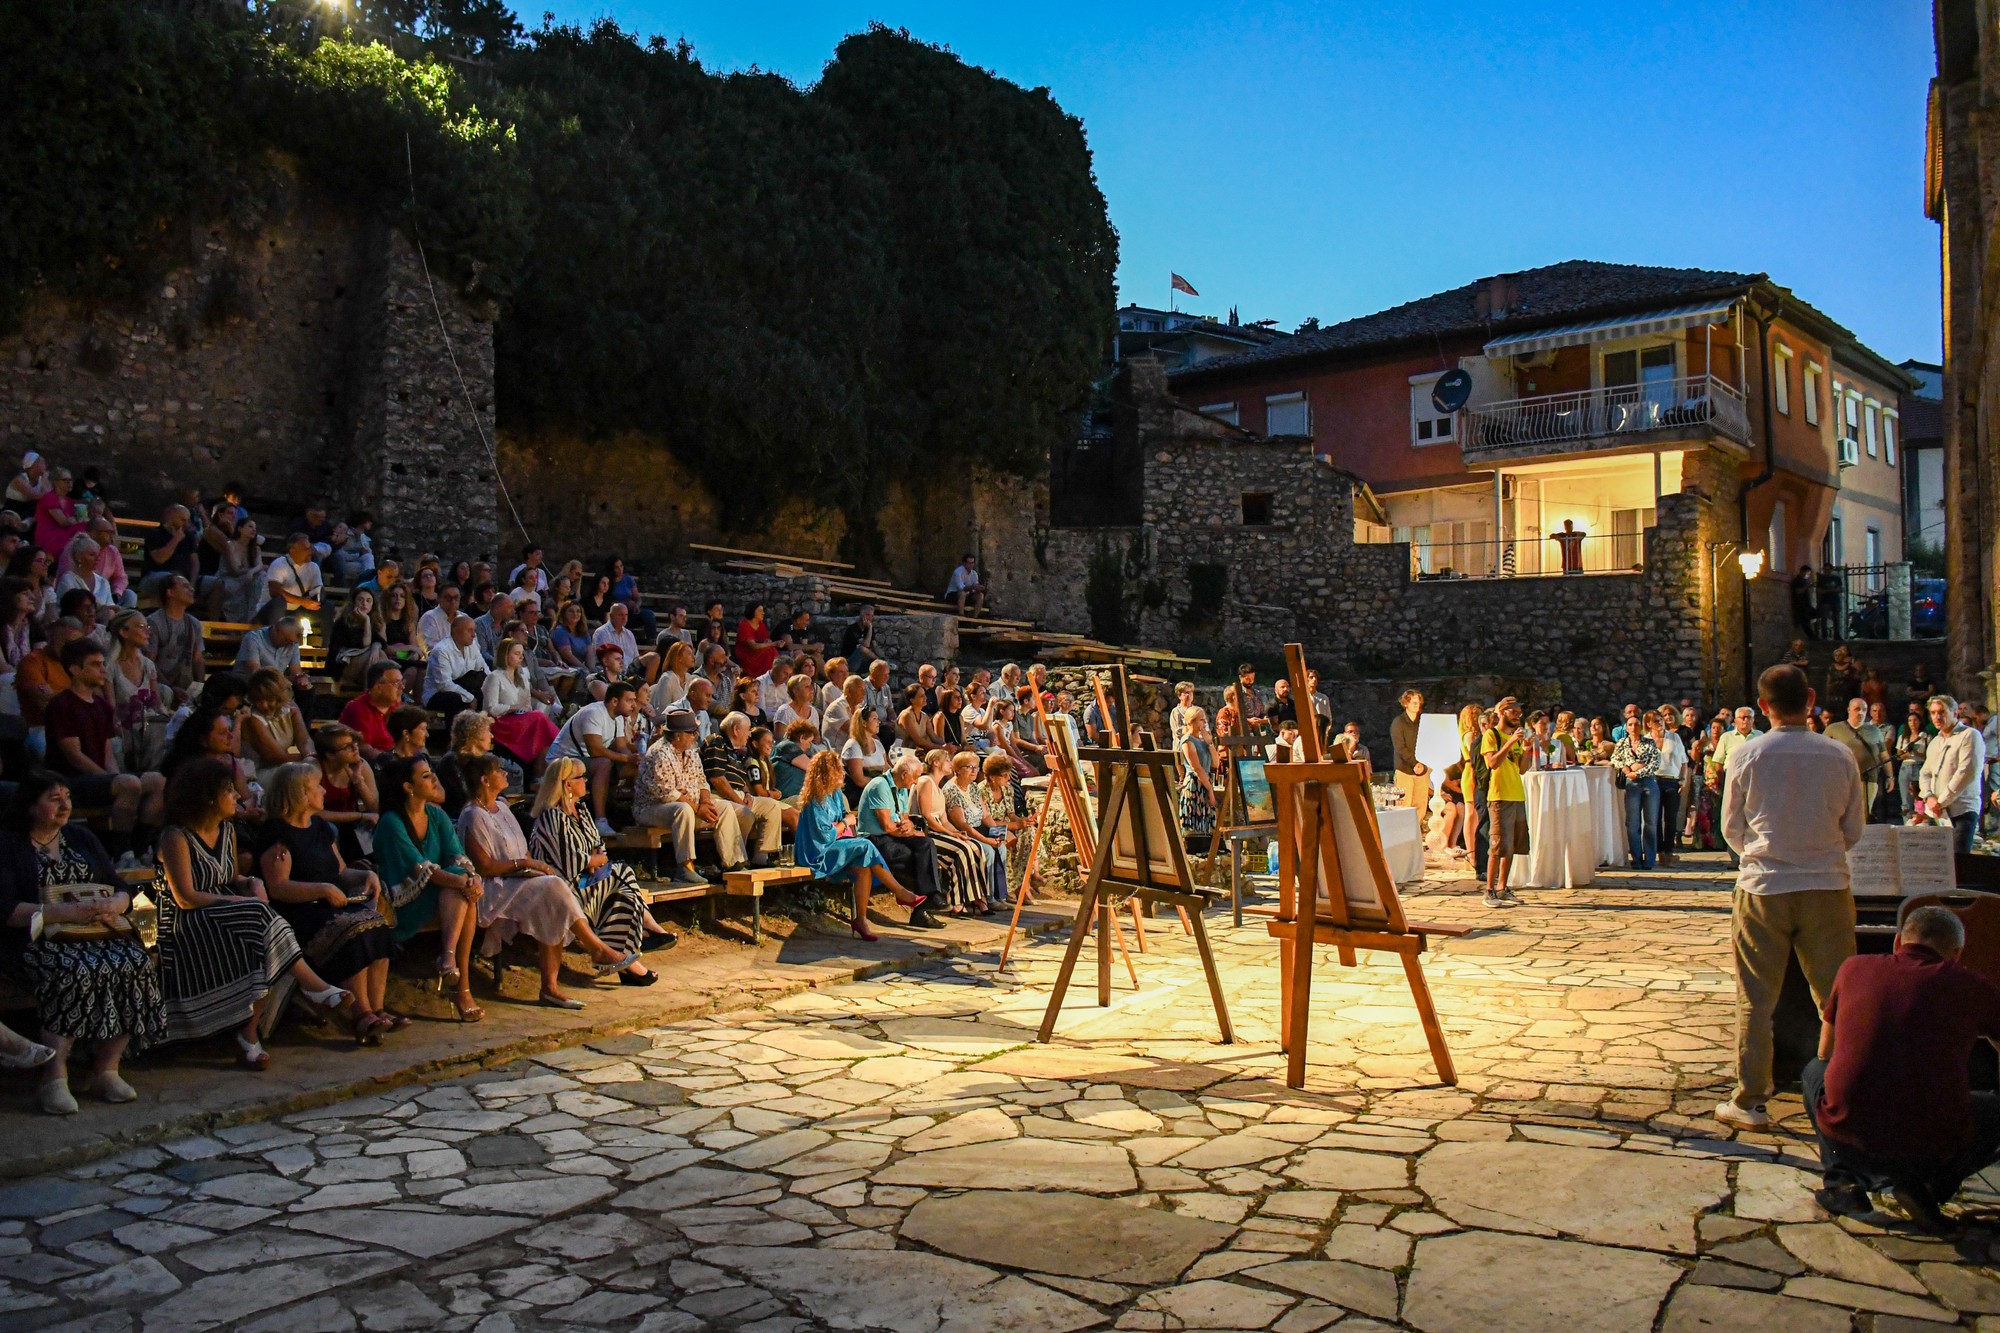 “I am painting with you” – second exhibition by D-r Poposka Karche at Ohrid Summer Festival